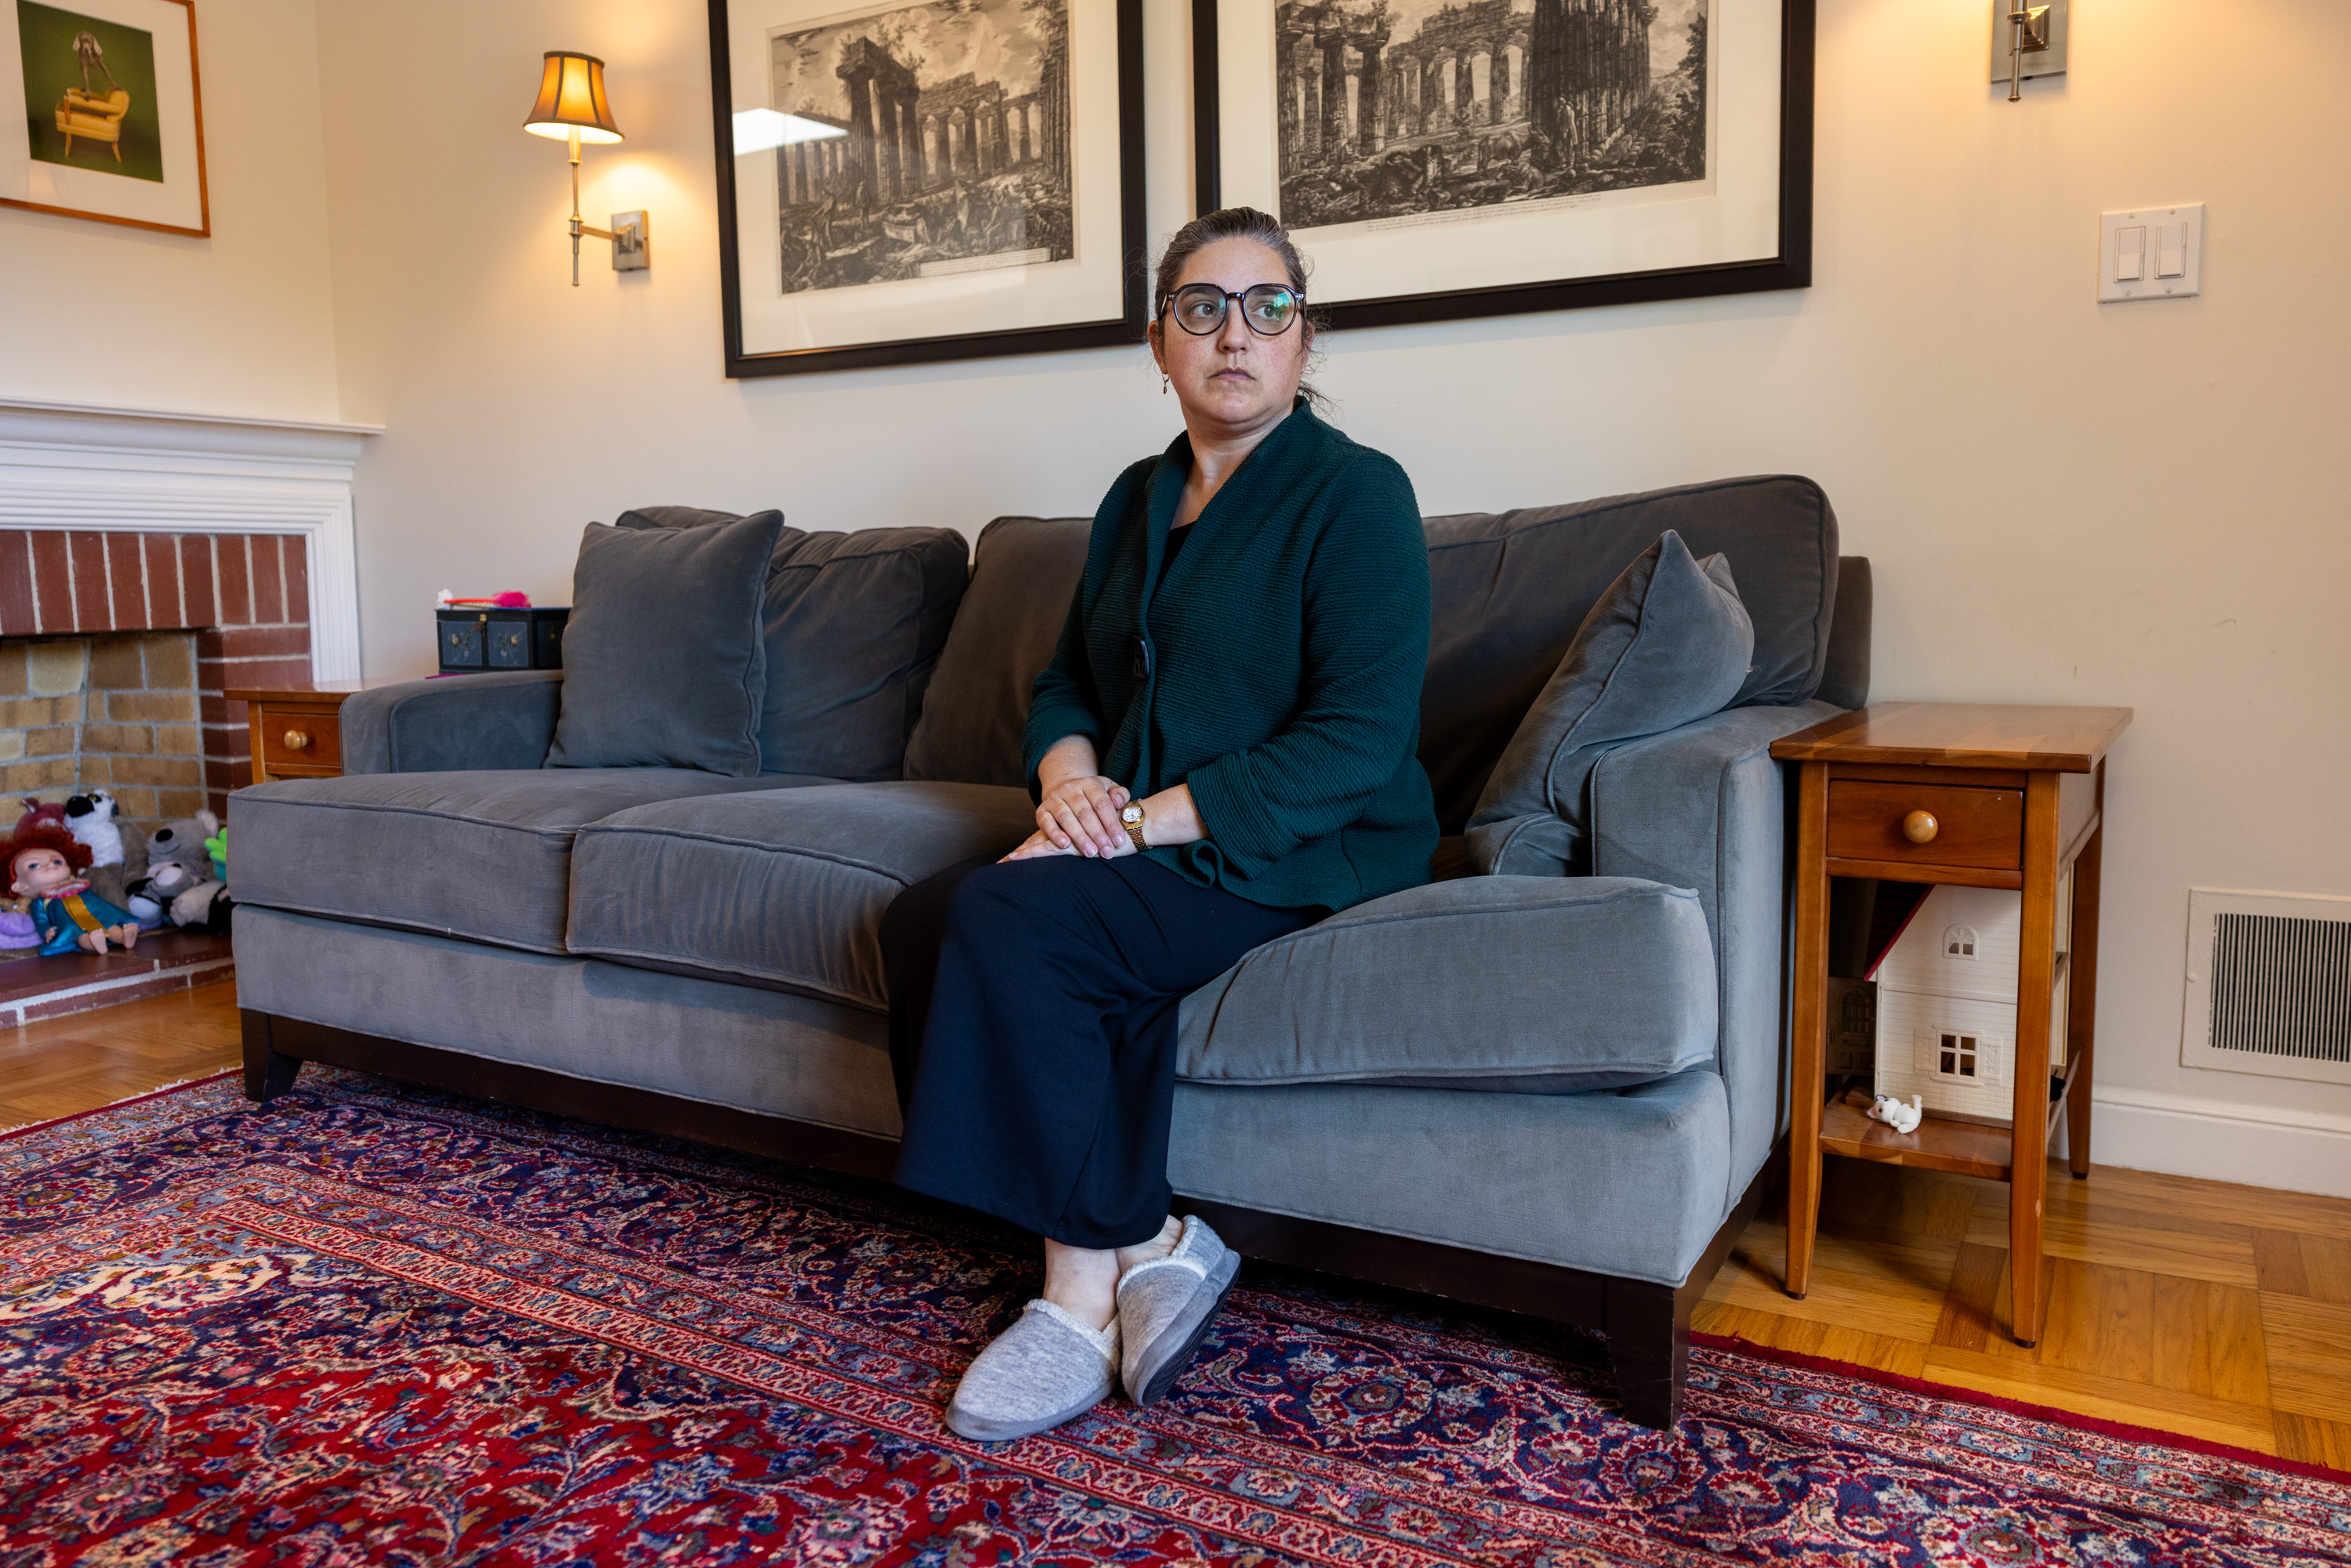 A woman sits on a gray couch in a cozy room with a Persian rug, artworks, and plush toys.